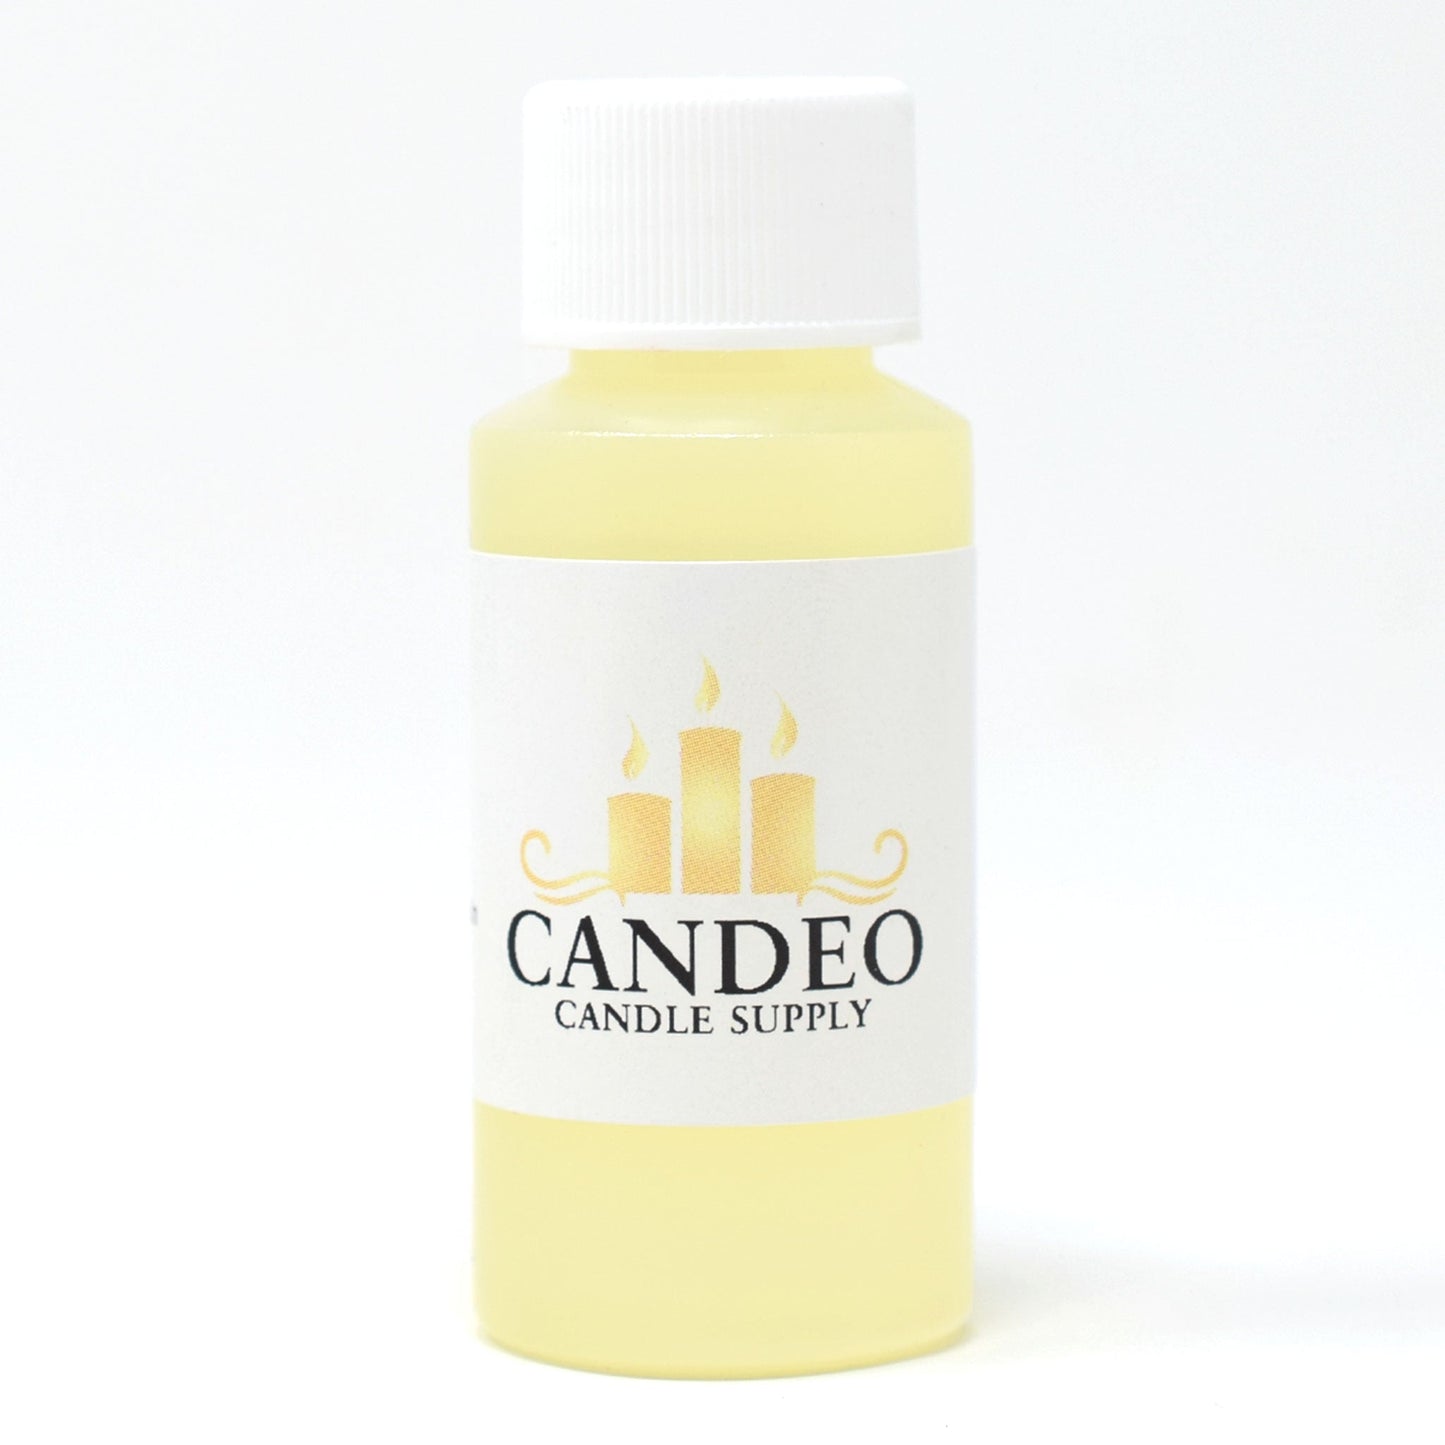 Wild Cherry Fragrance Oil - Candeo Candle Supply